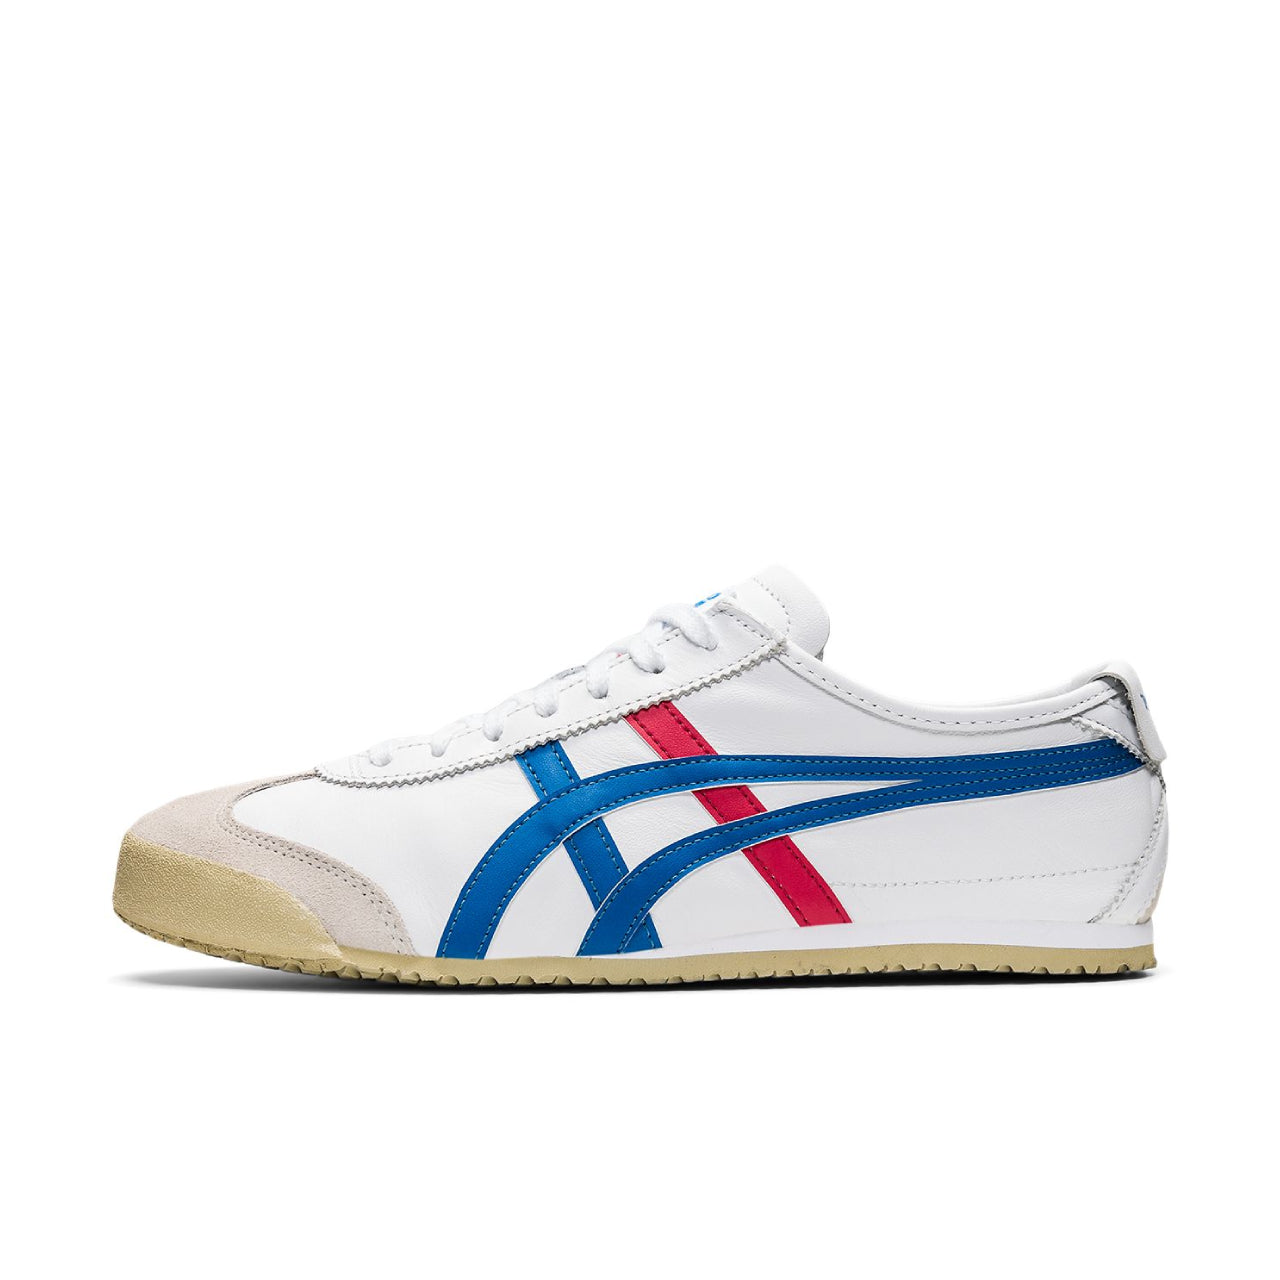 Onitsuka Tiger Mexico 66 White Blue Red - 1183C102-100/DL408-0146 - Left